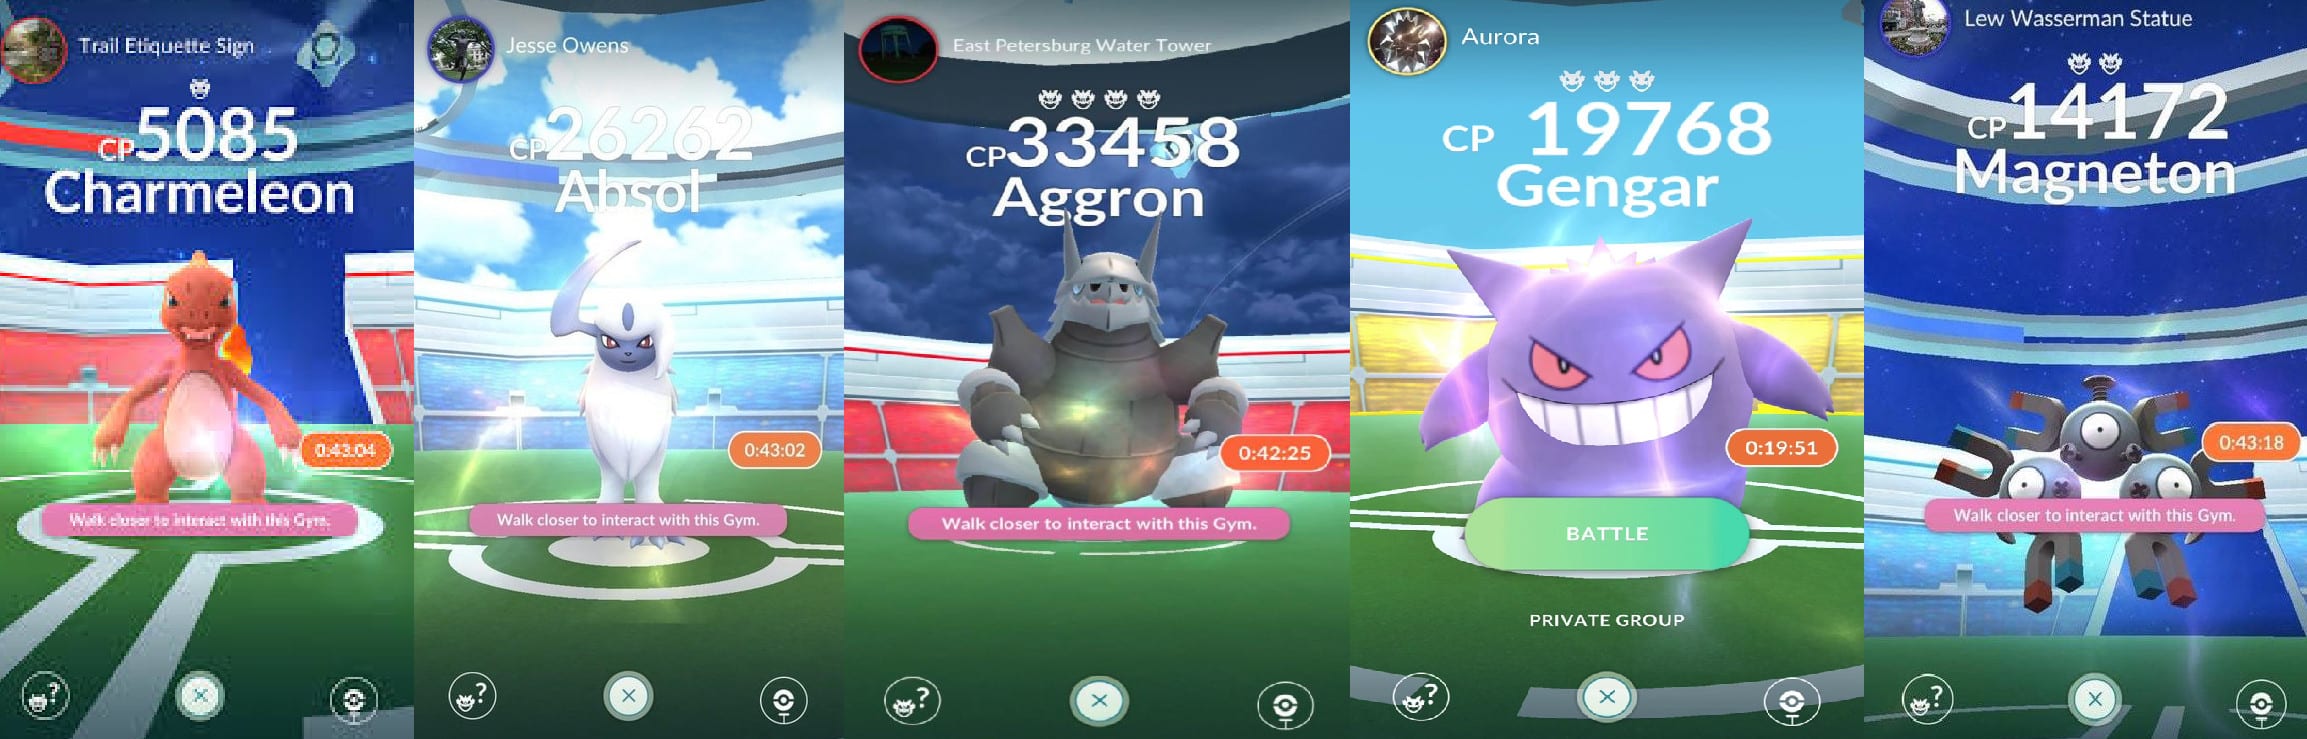 currently available raid bosses pokemon go